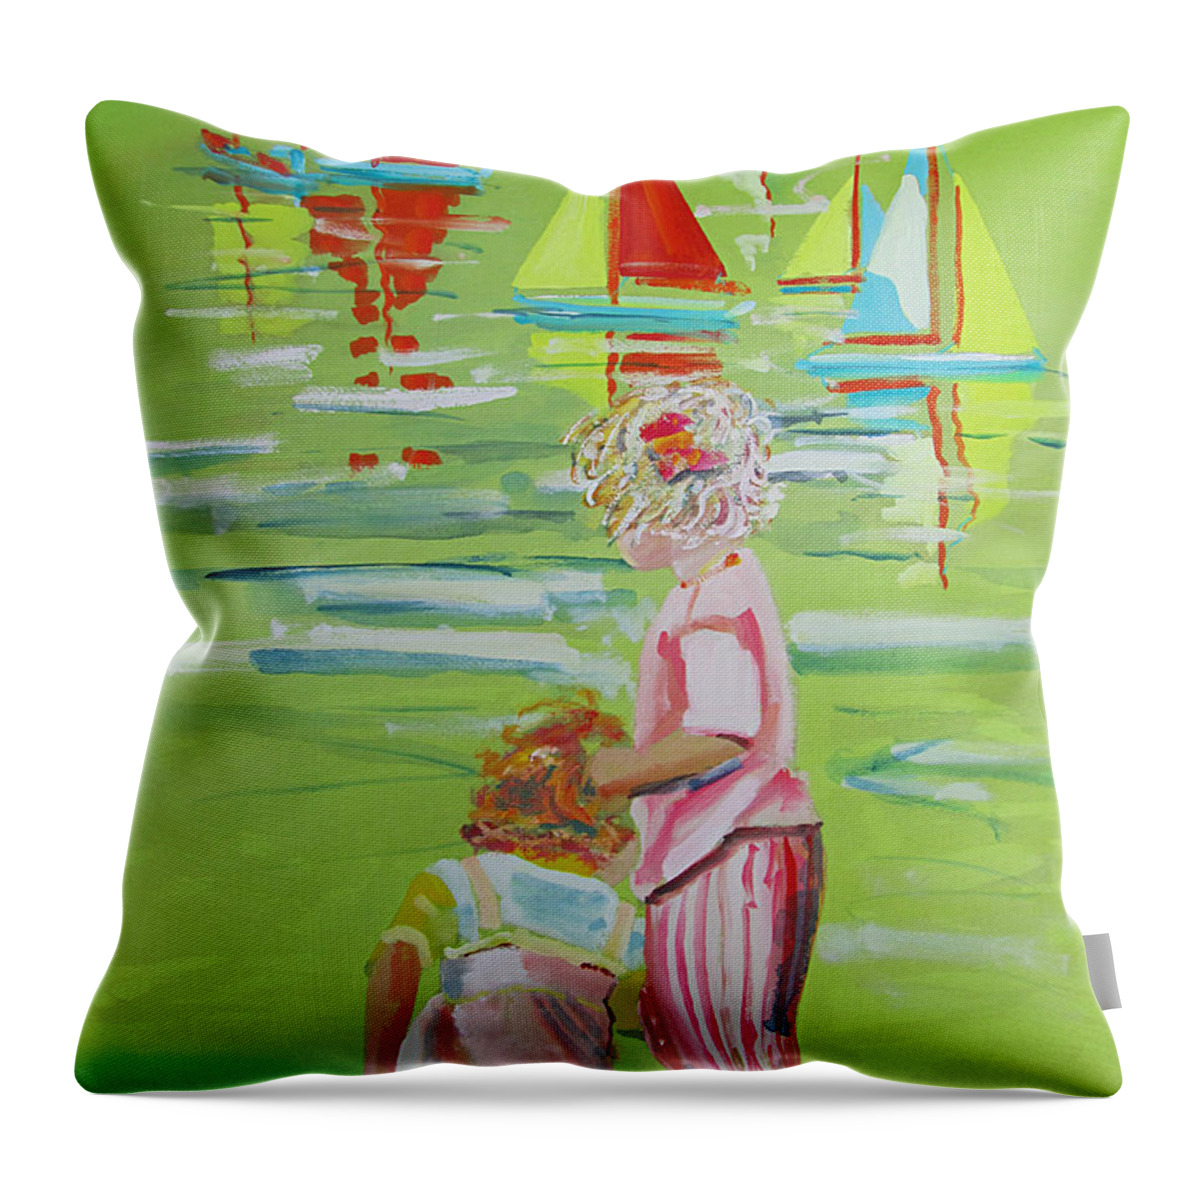 Kids Throw Pillow featuring the painting Regatta by Charles Stuart